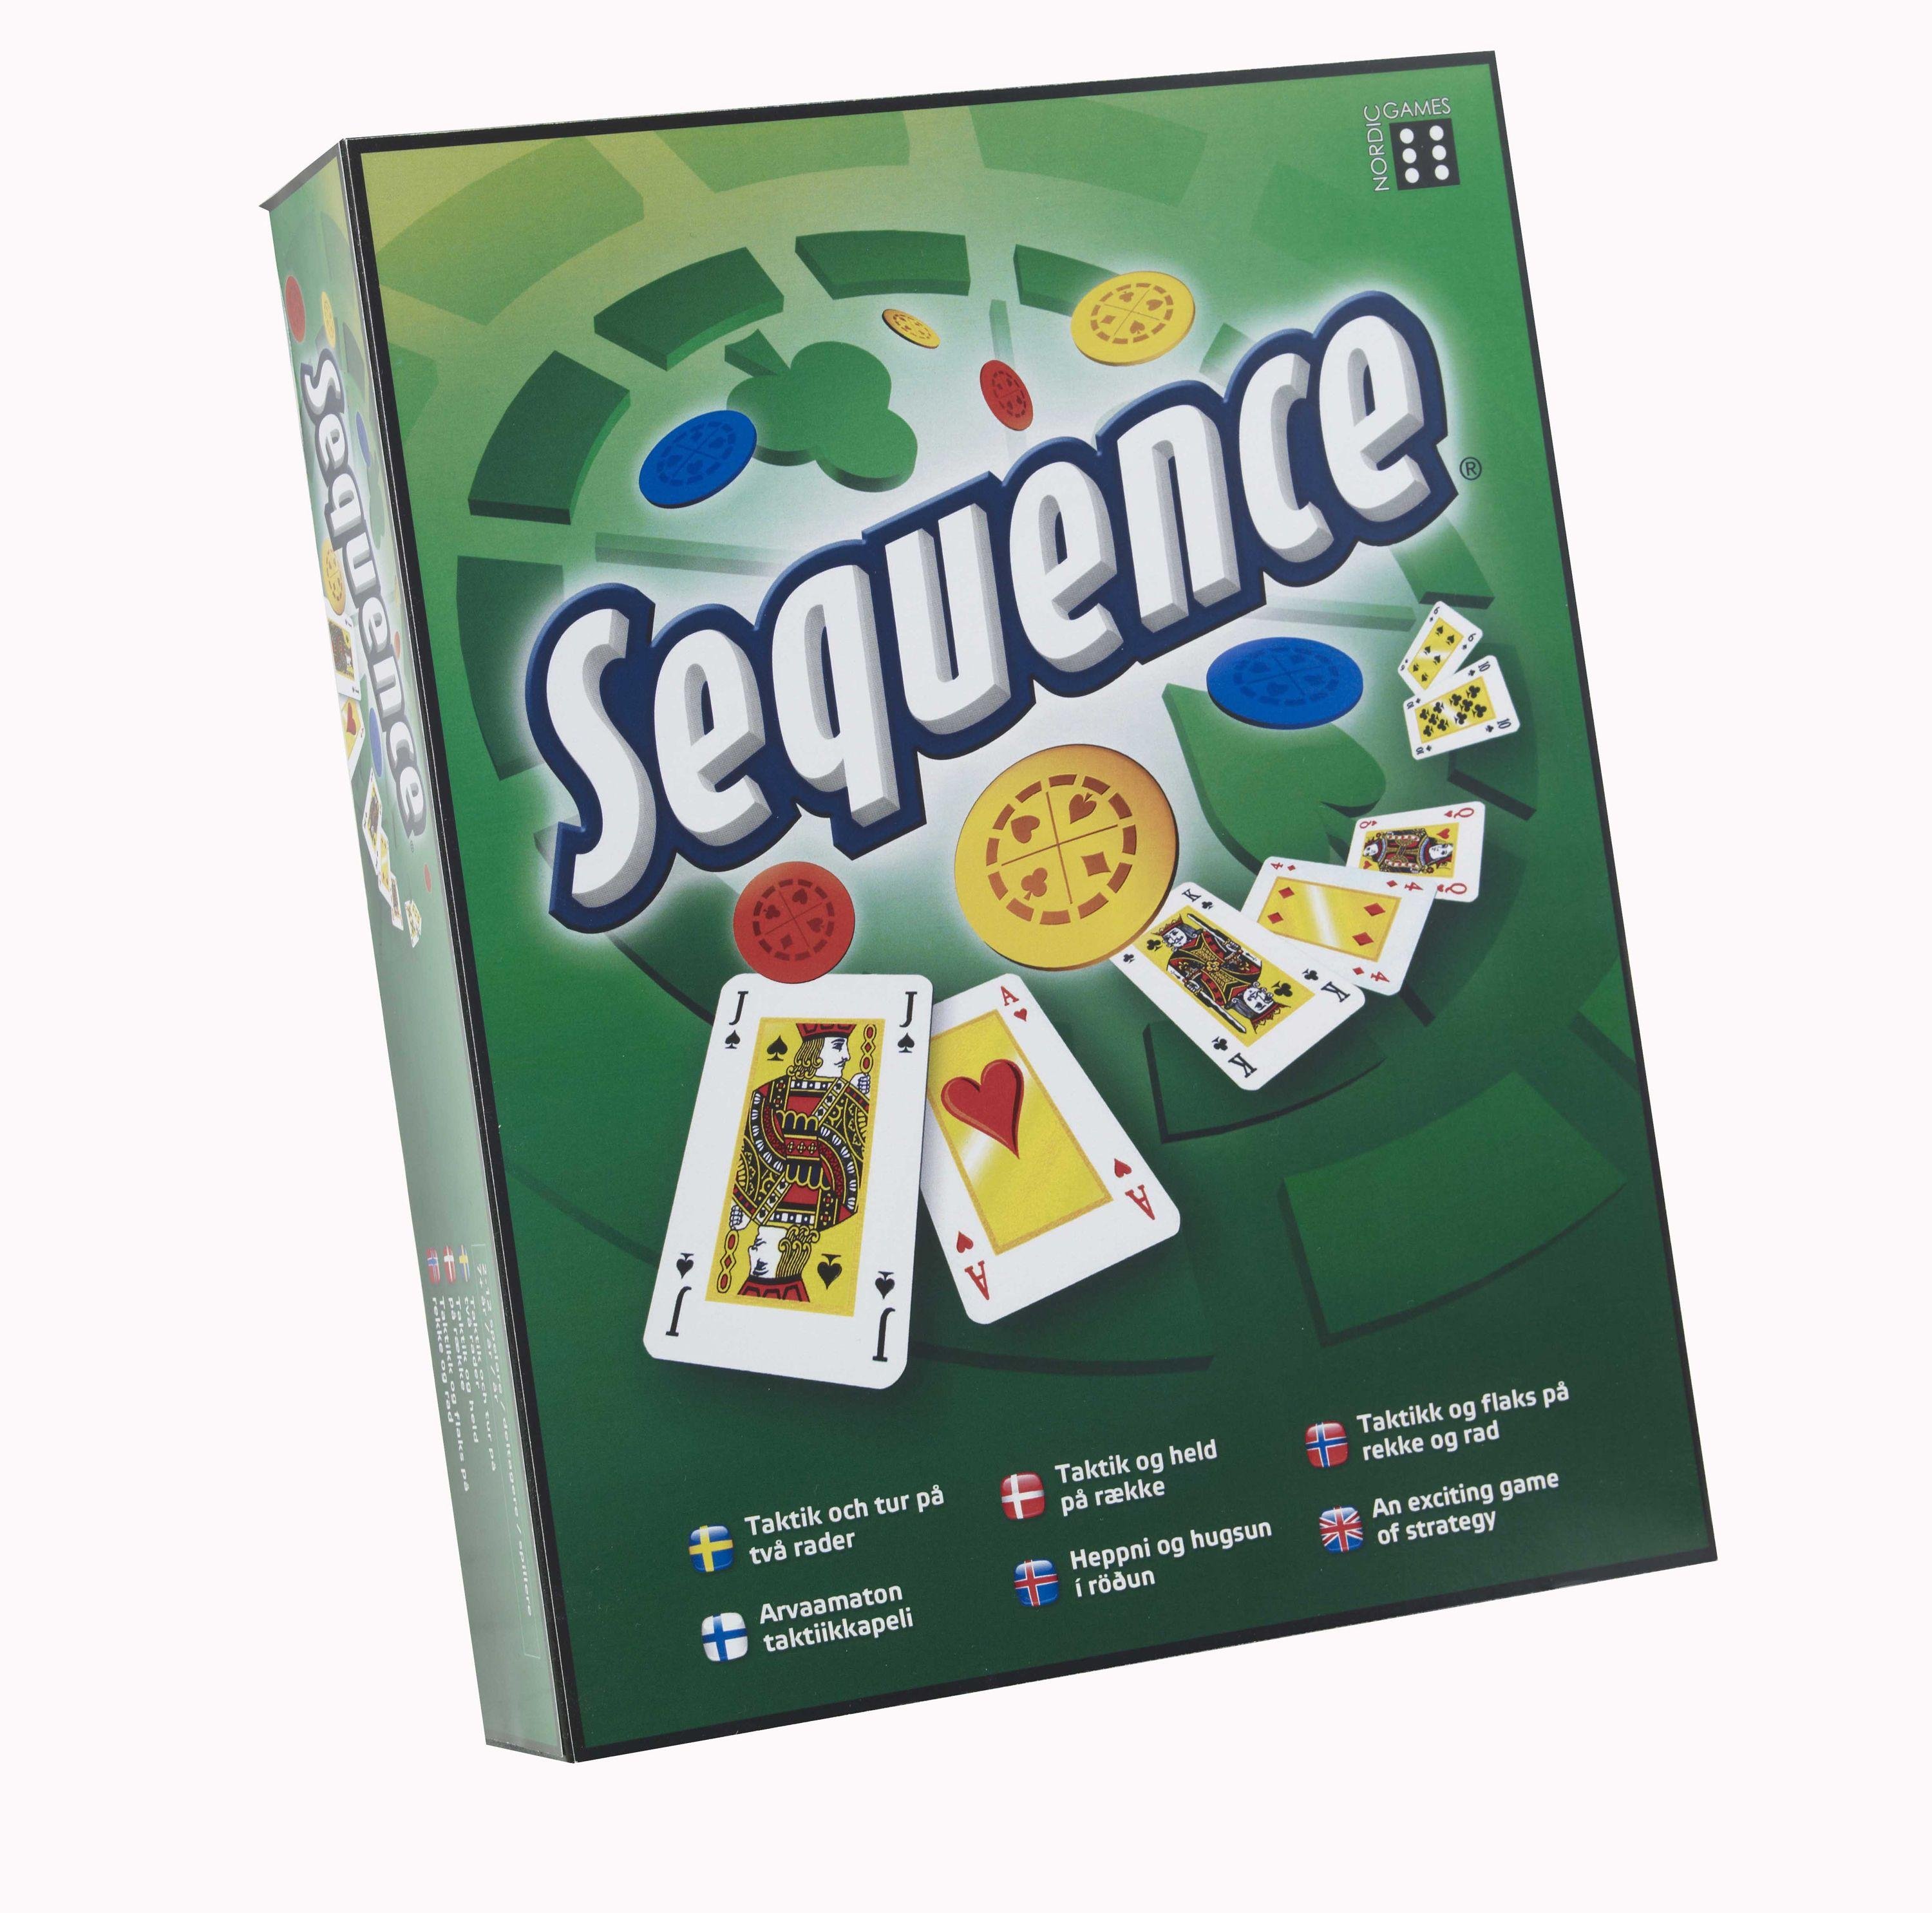 Sequence Board Game. review